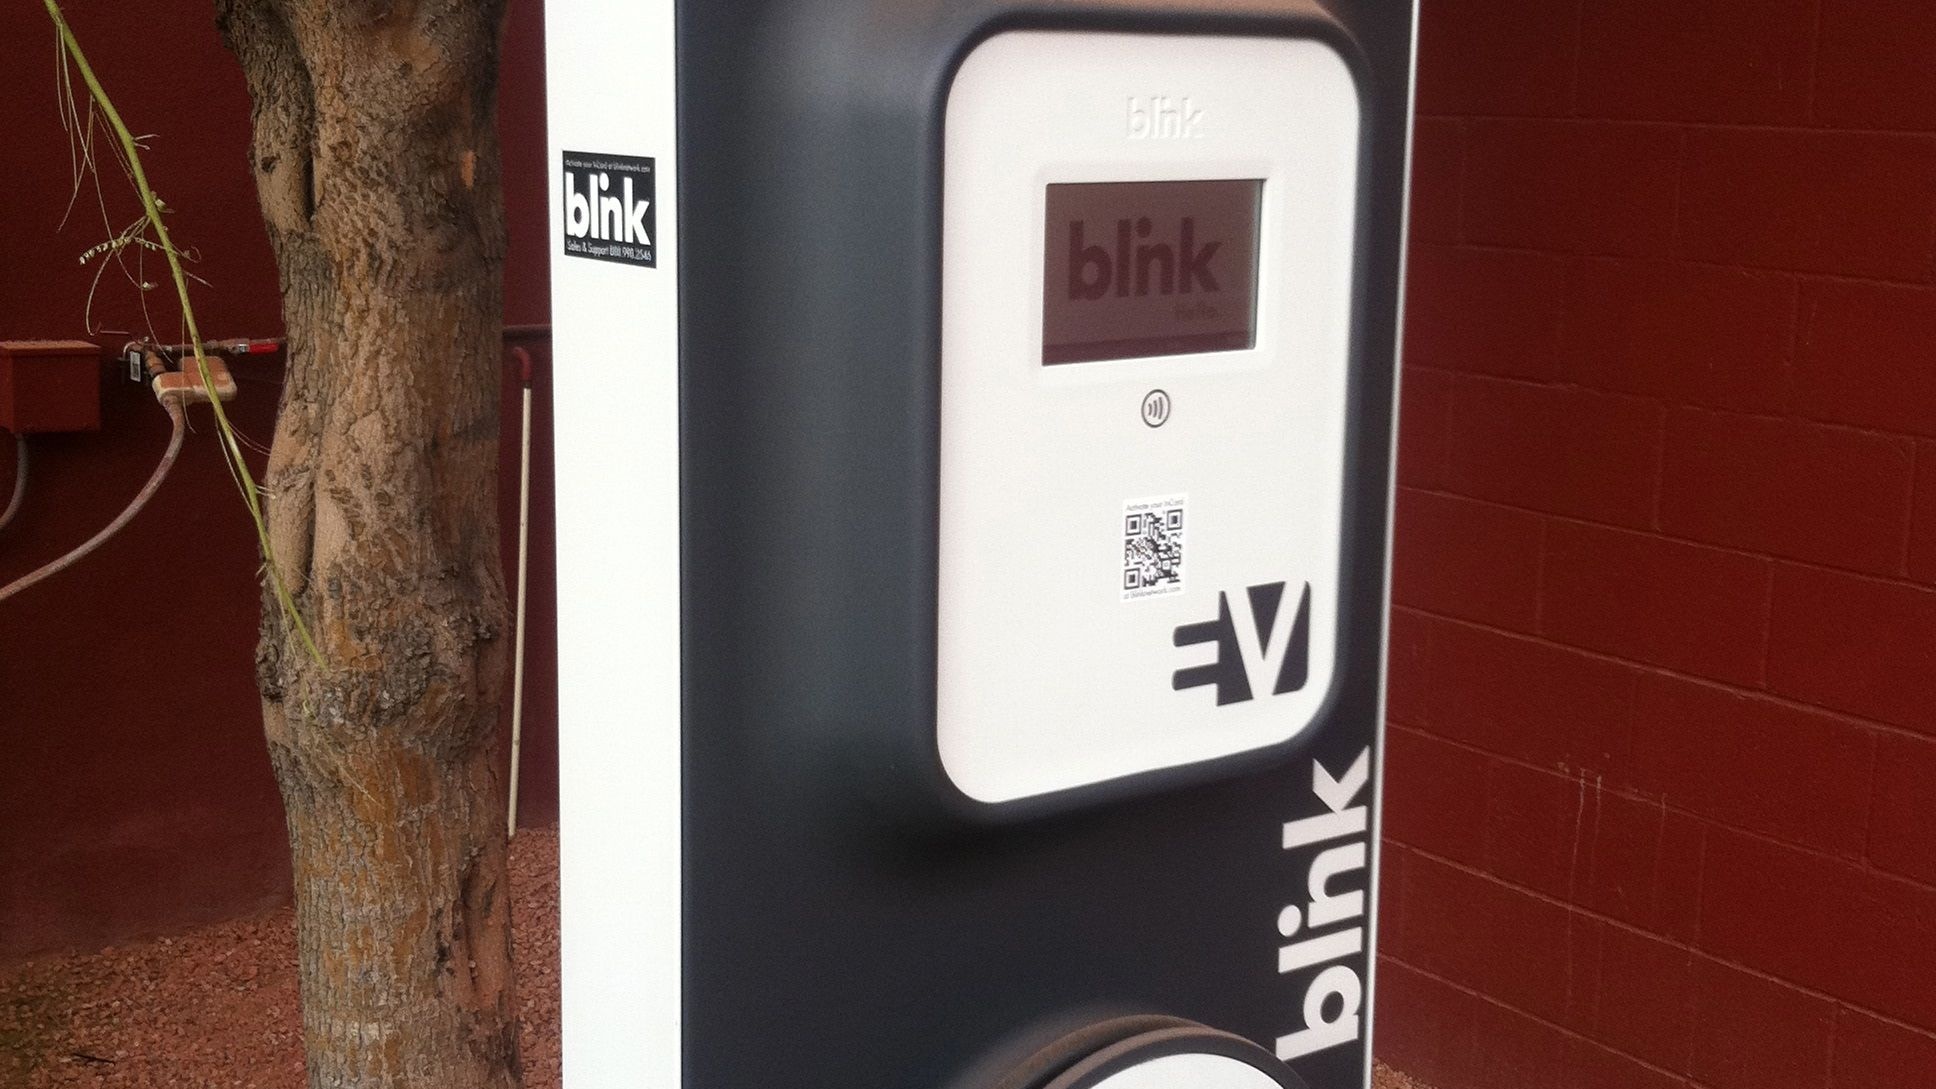 ECOtality Blink charging station, showing sticker on the side with 800 number